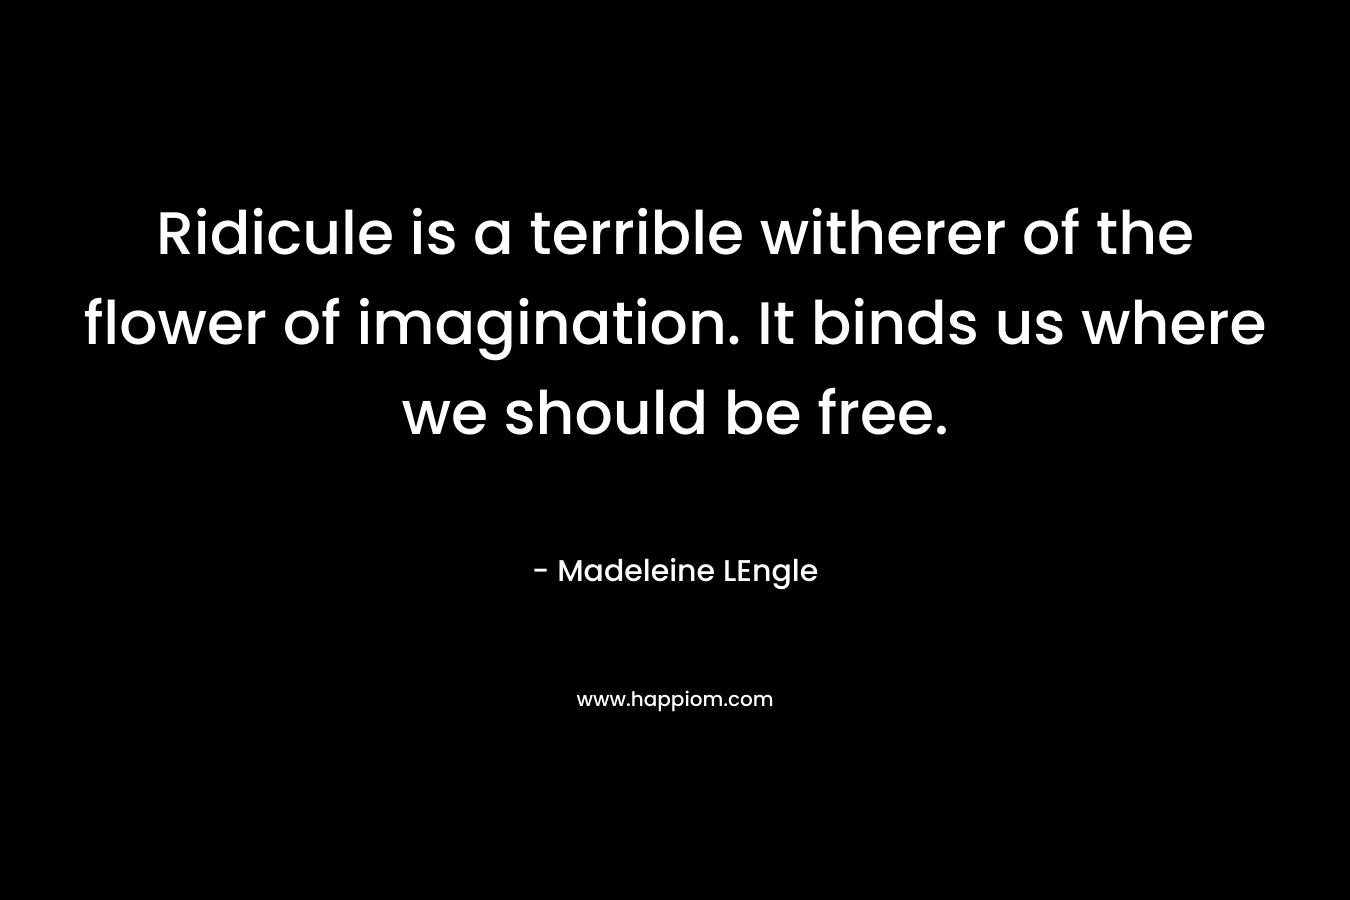 Ridicule is a terrible witherer of the flower of imagination. It binds us where we should be free. – Madeleine LEngle